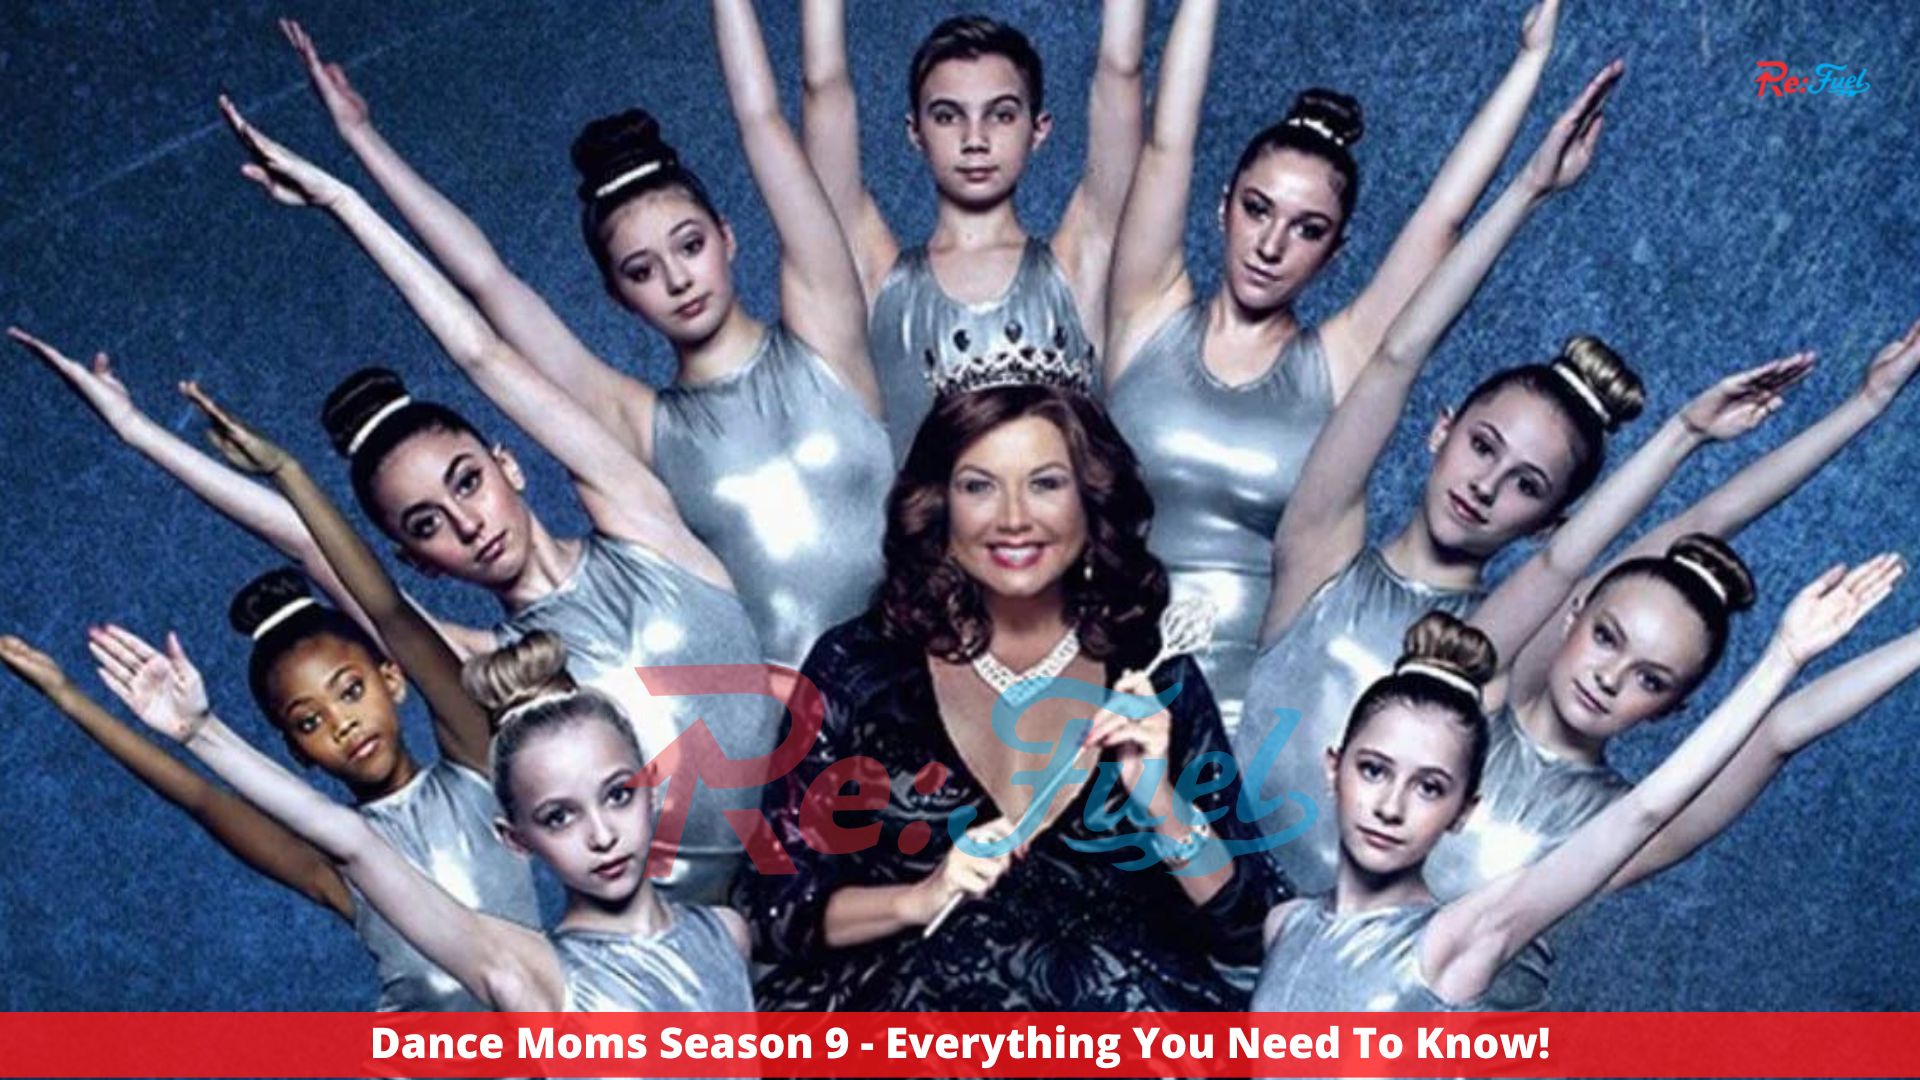 Dance Moms Season 9 - Everything You Need To Know!